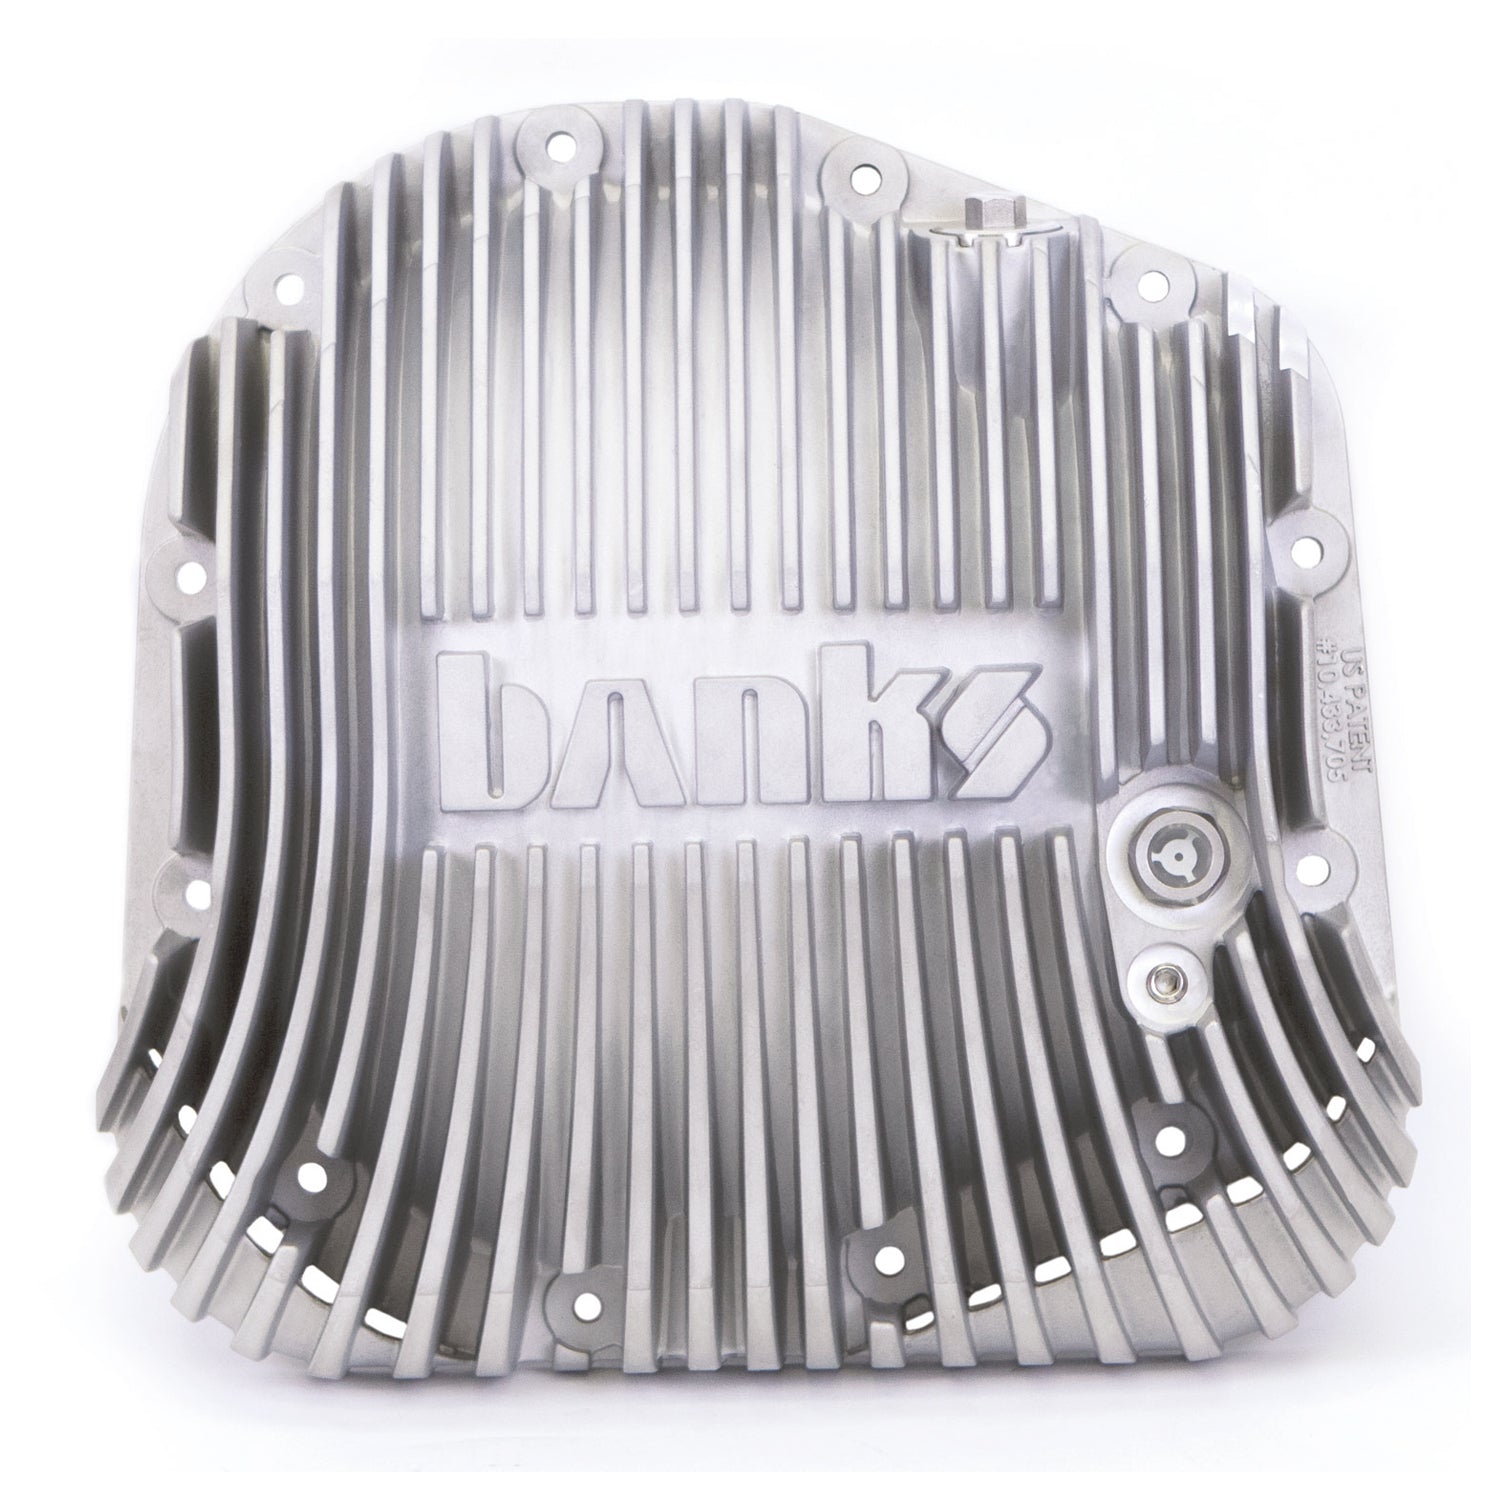 Banks Ram-Air Differential cover